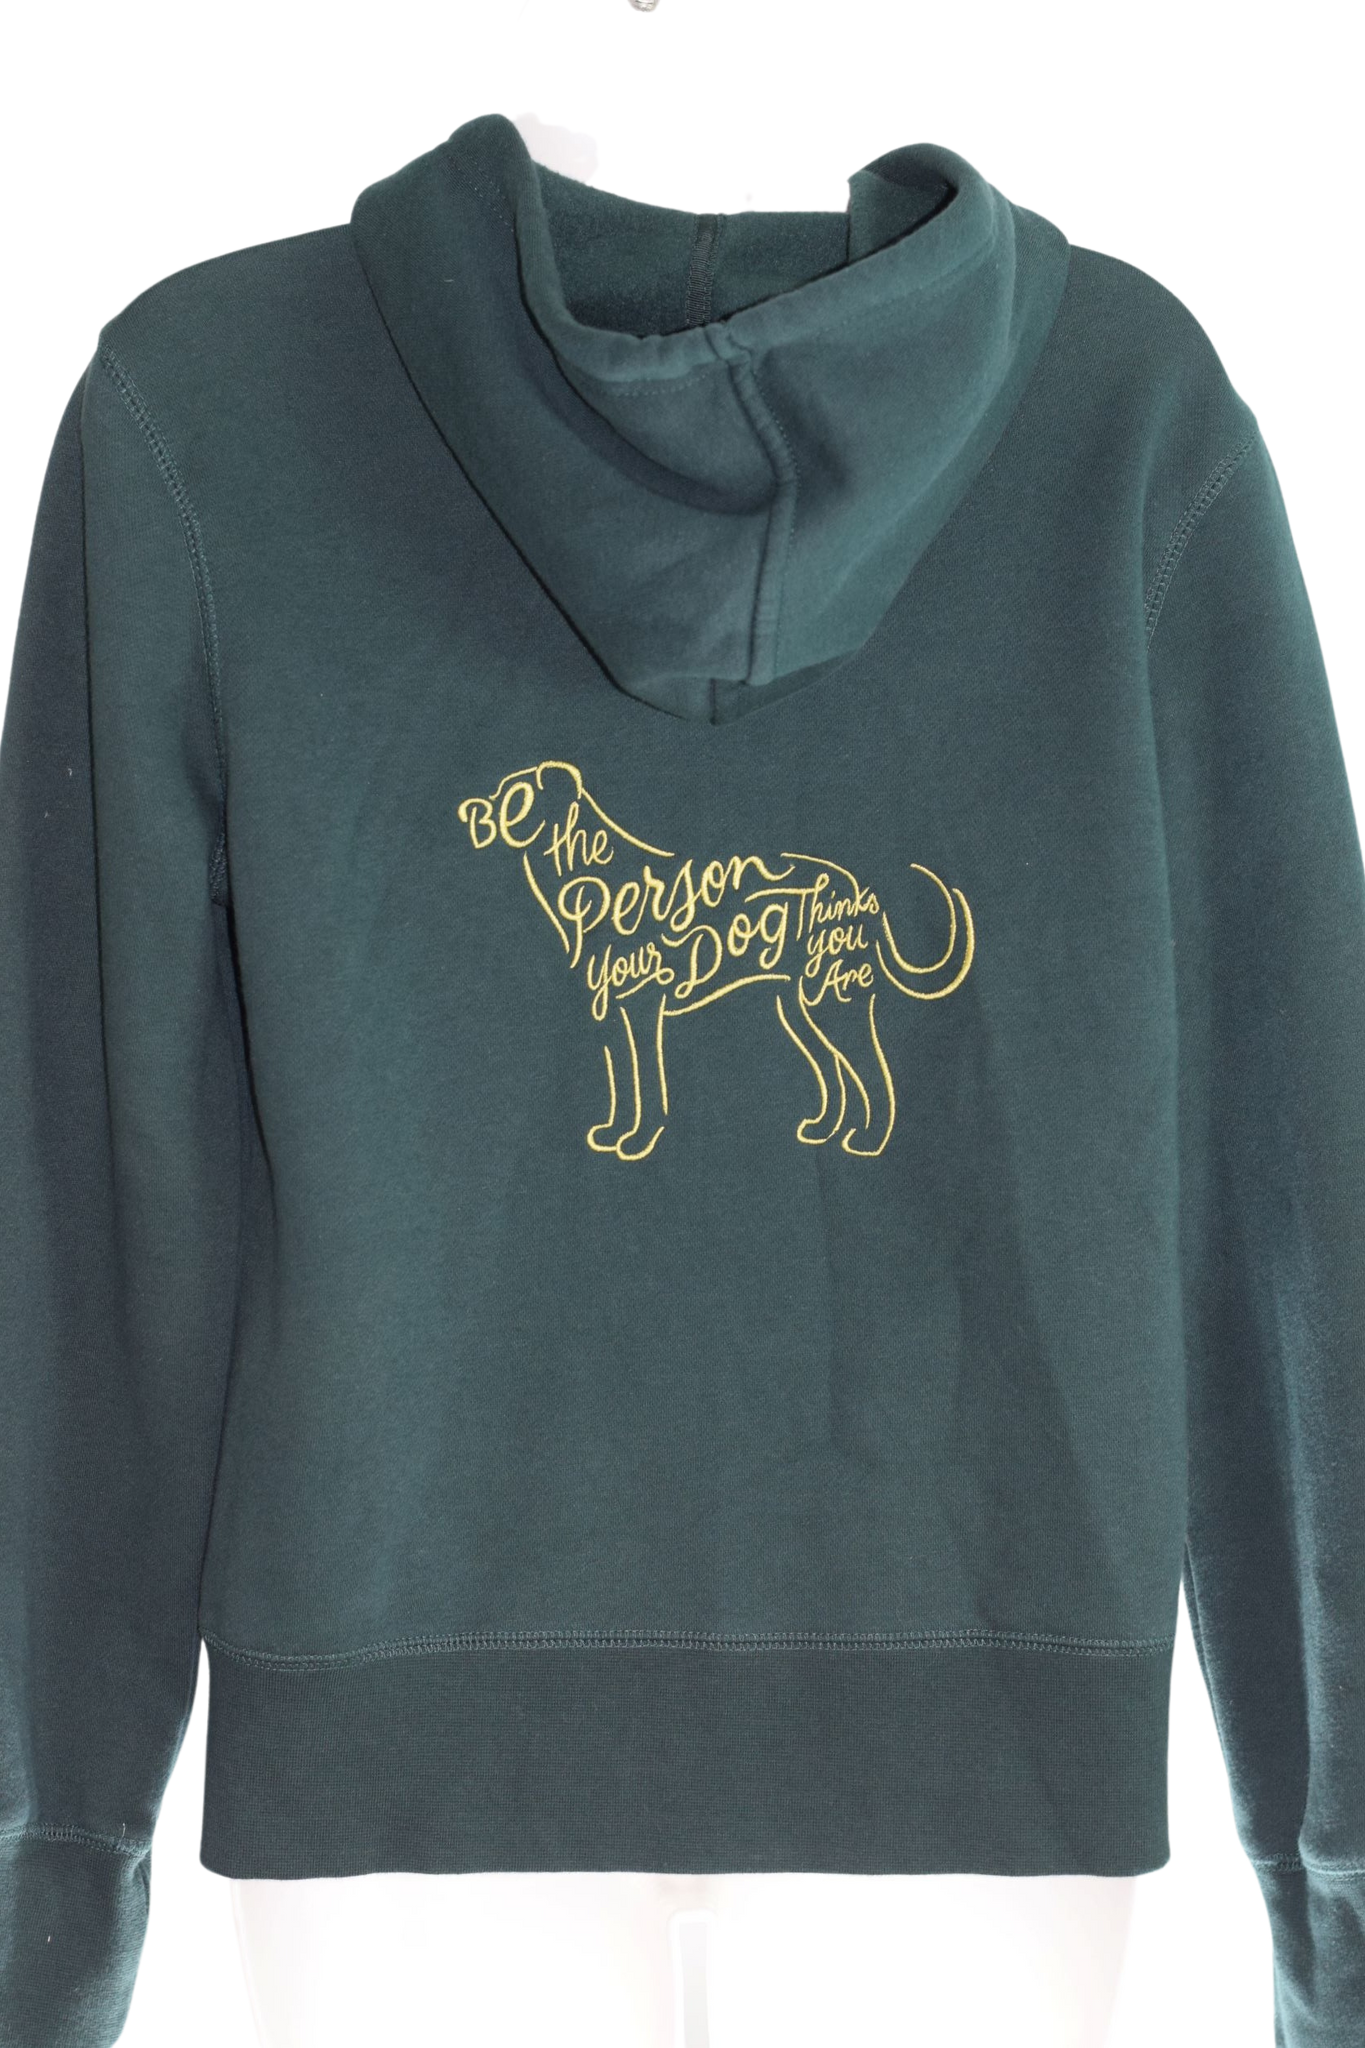 Embroidered Be the Person your dog thinks you are  Adult Small Zip Up Hoodie for the Dog Lover